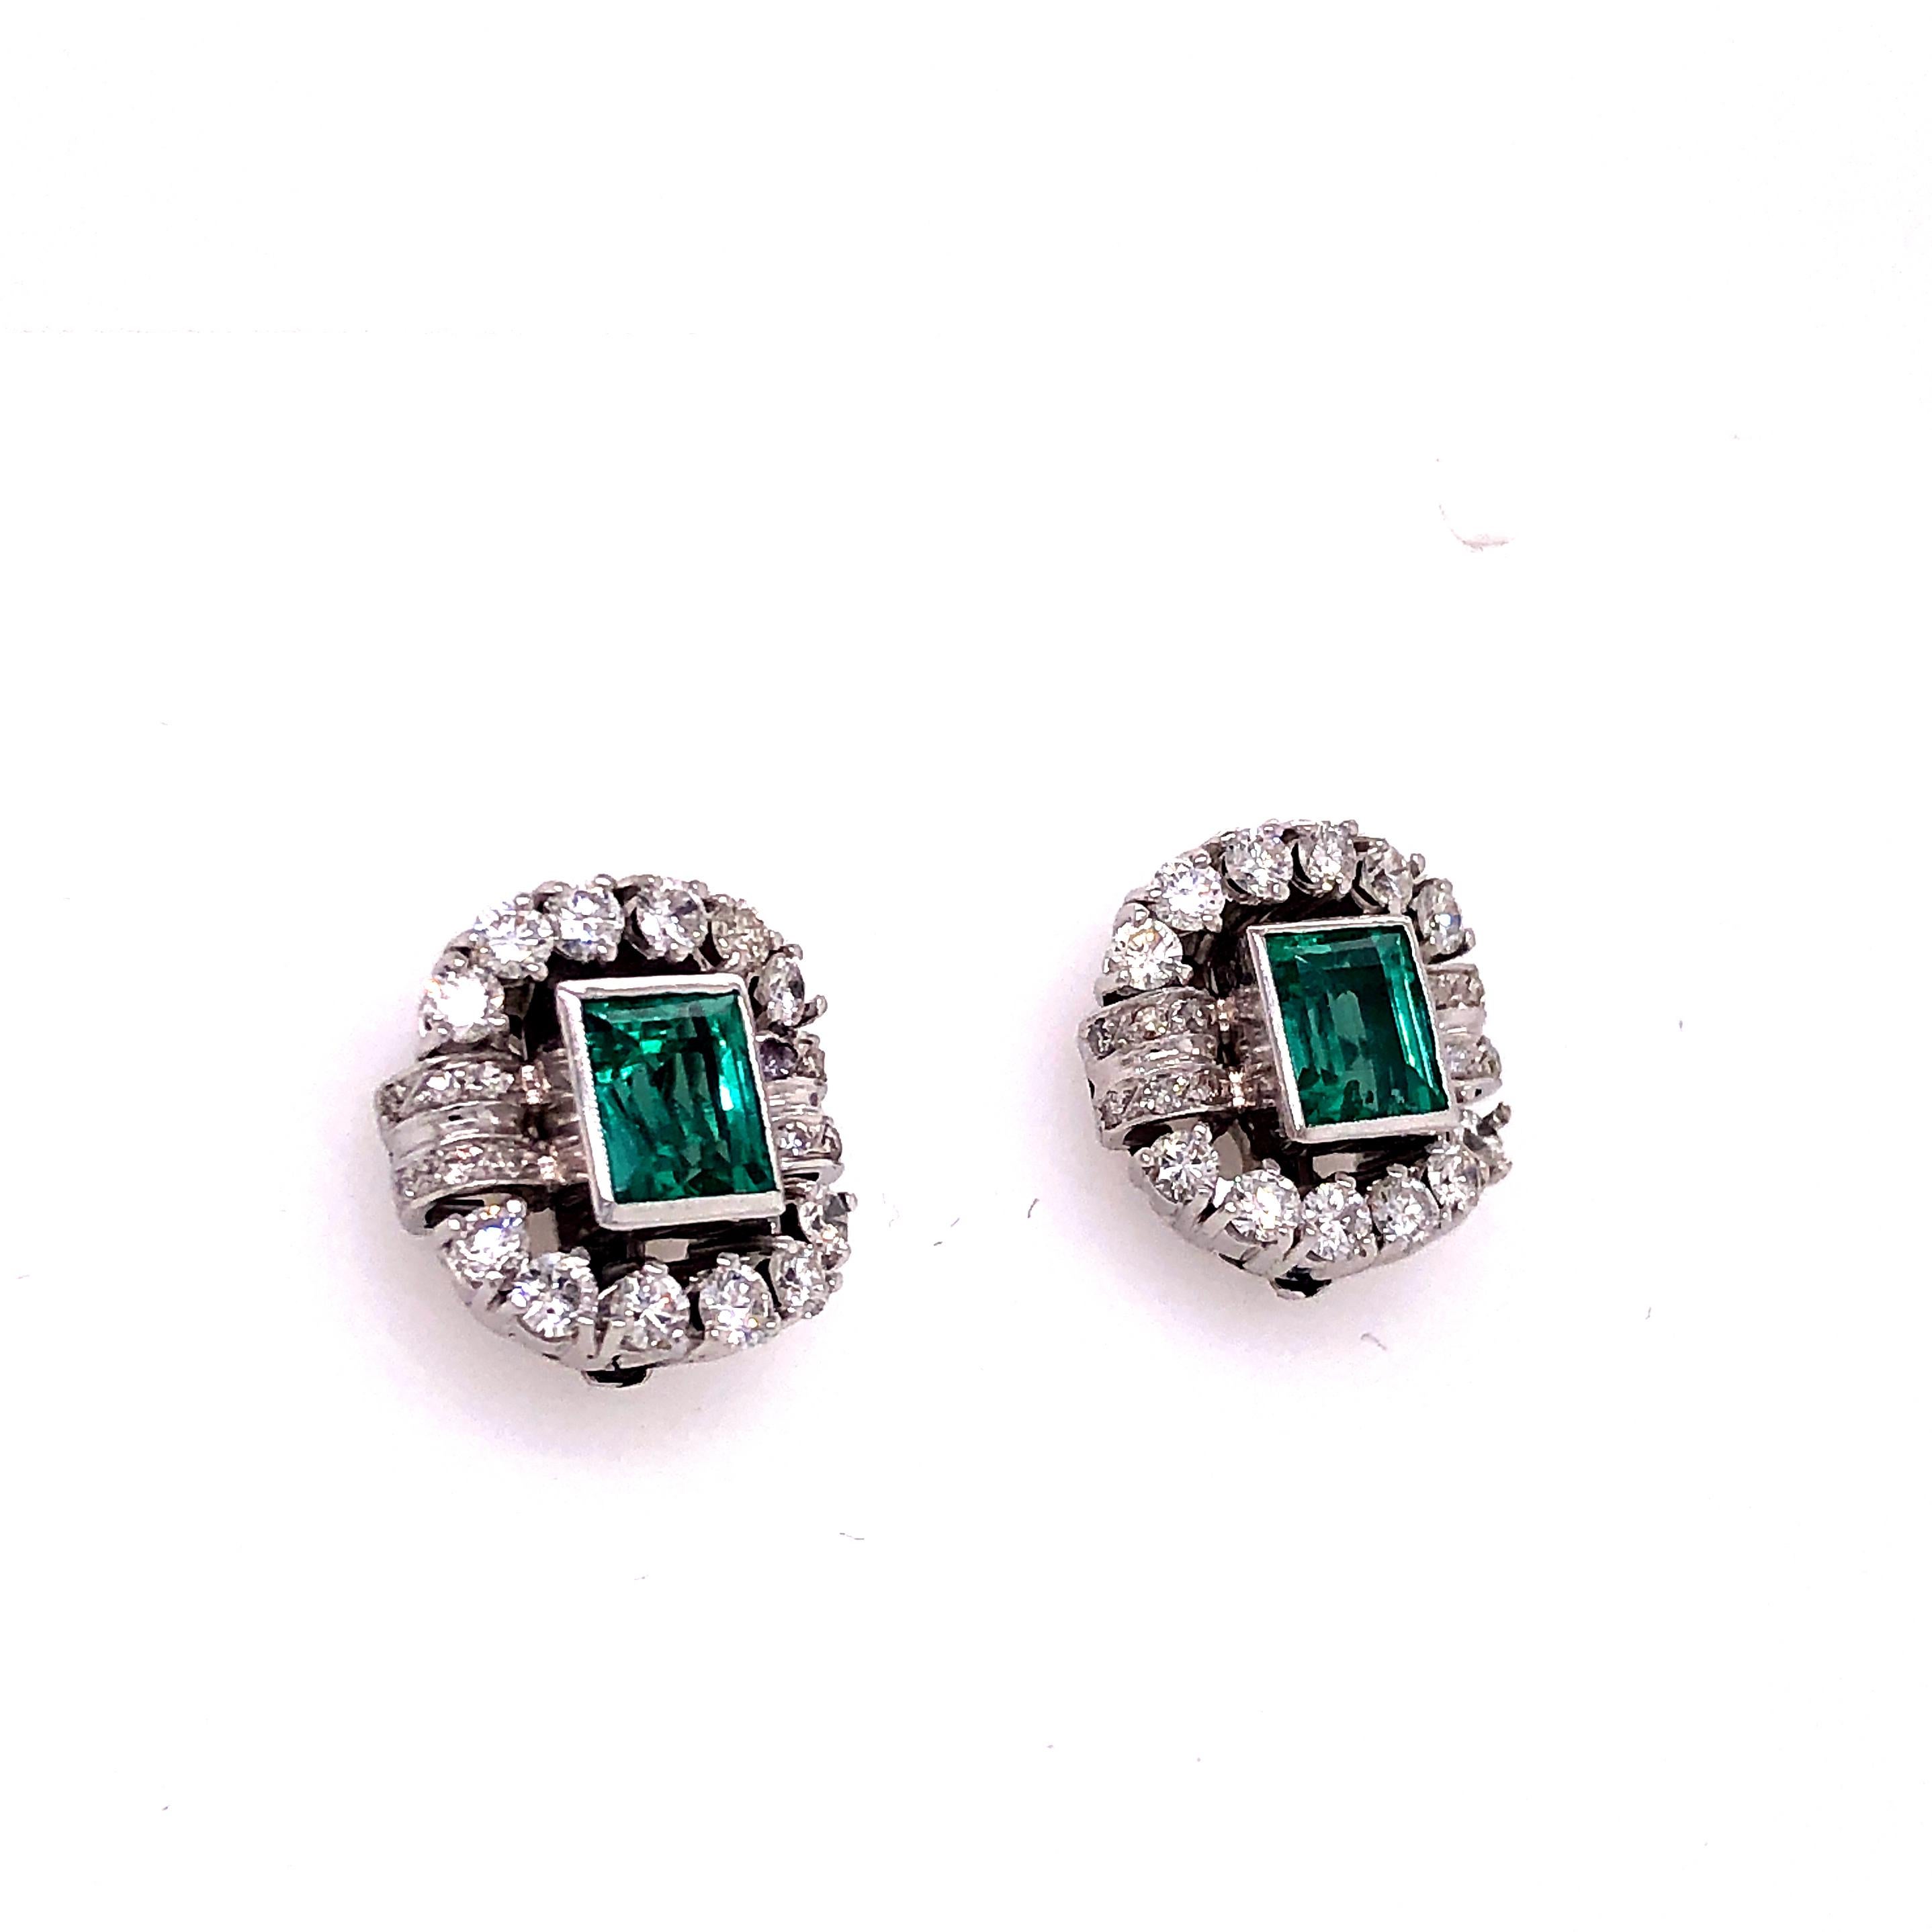 One of a kind beautiful pair of handmade platinum earrings. This vintage design shows two Columbian Emerald gemstones bezel set in a decorative natural Diamond mounting. The pair is accompanied by a G.I.A. certificate which indicates these gemstones